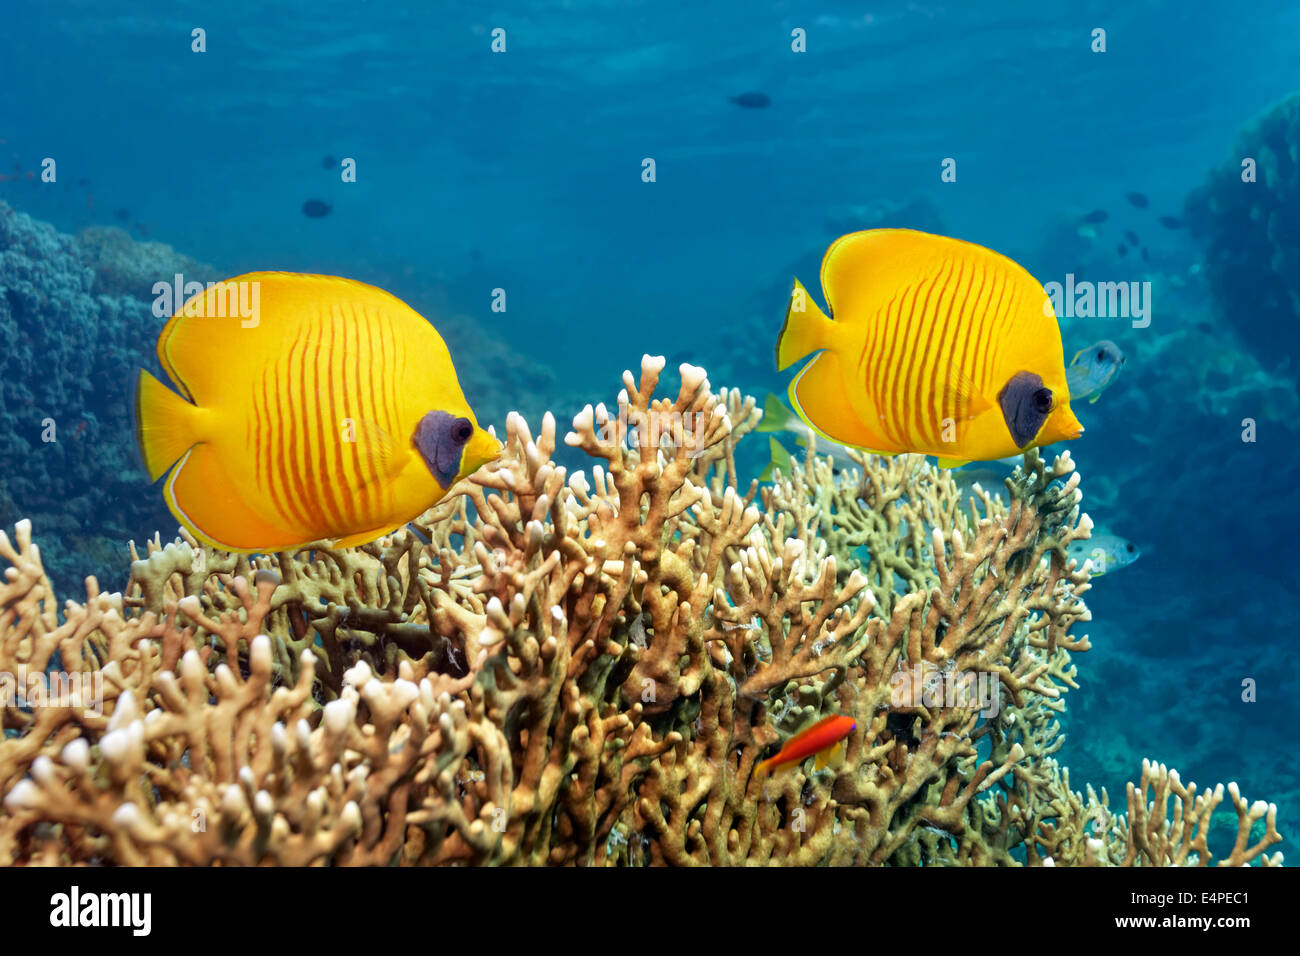 Bluecheek butterflyfish (Chaetodon semilarvatus), over fire coral, Red Sea, Egypt Stock Photo